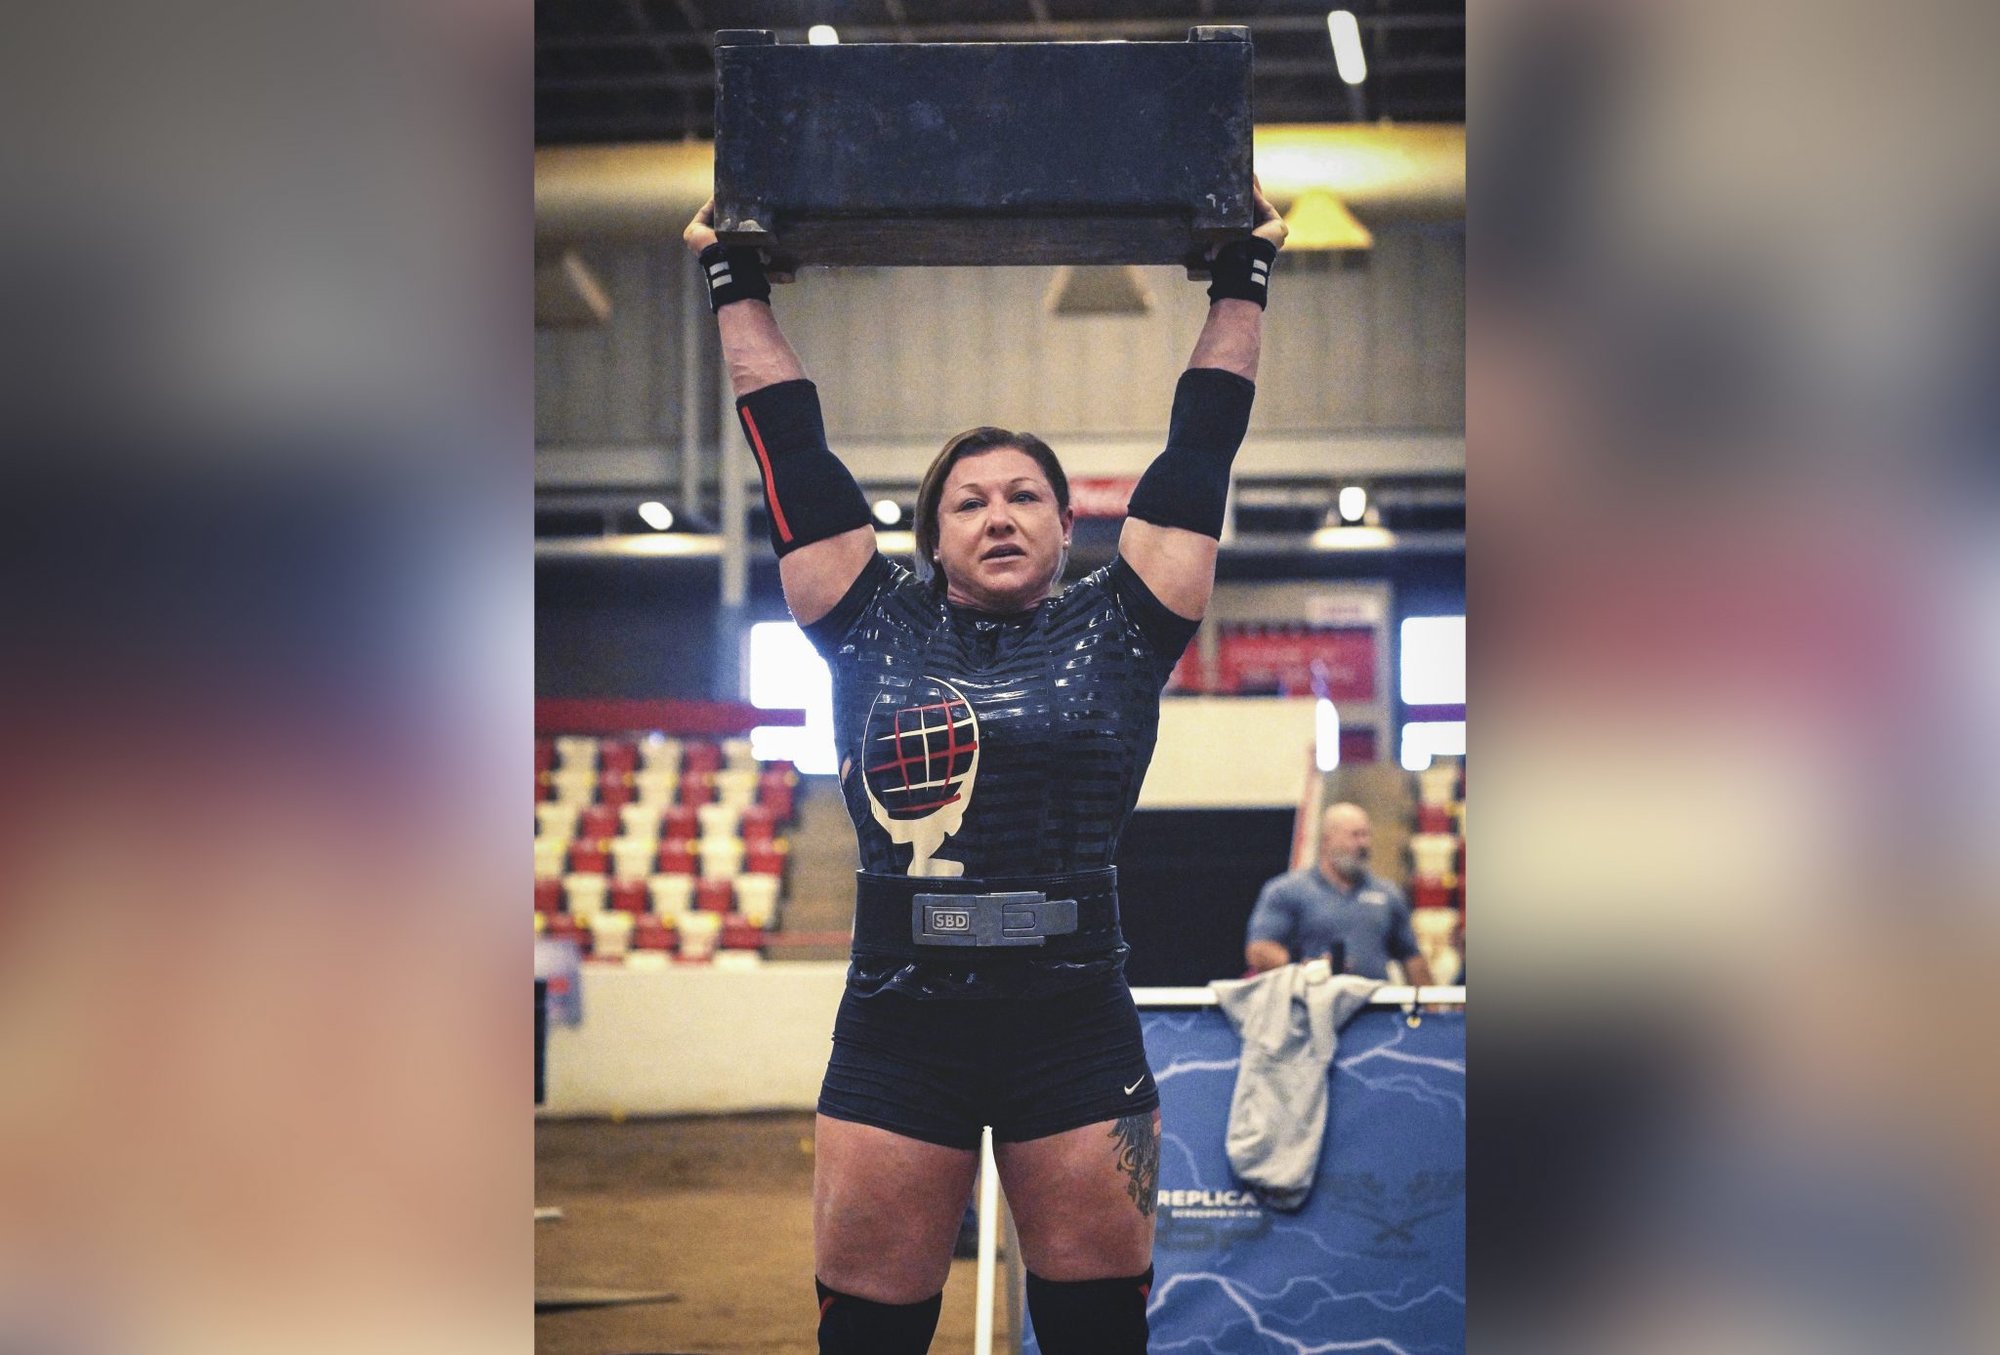 Staff Sgt. Gabriele Burgholzer successfully lifts 194 pounds over her head, setting a new world record in the women’s middleweight division during the Mouser Block event at the Mammoth Strength Challenge on Jan.23 in Bowling Green, Kentucky. Photo by Sgt. Nicole Narciso.